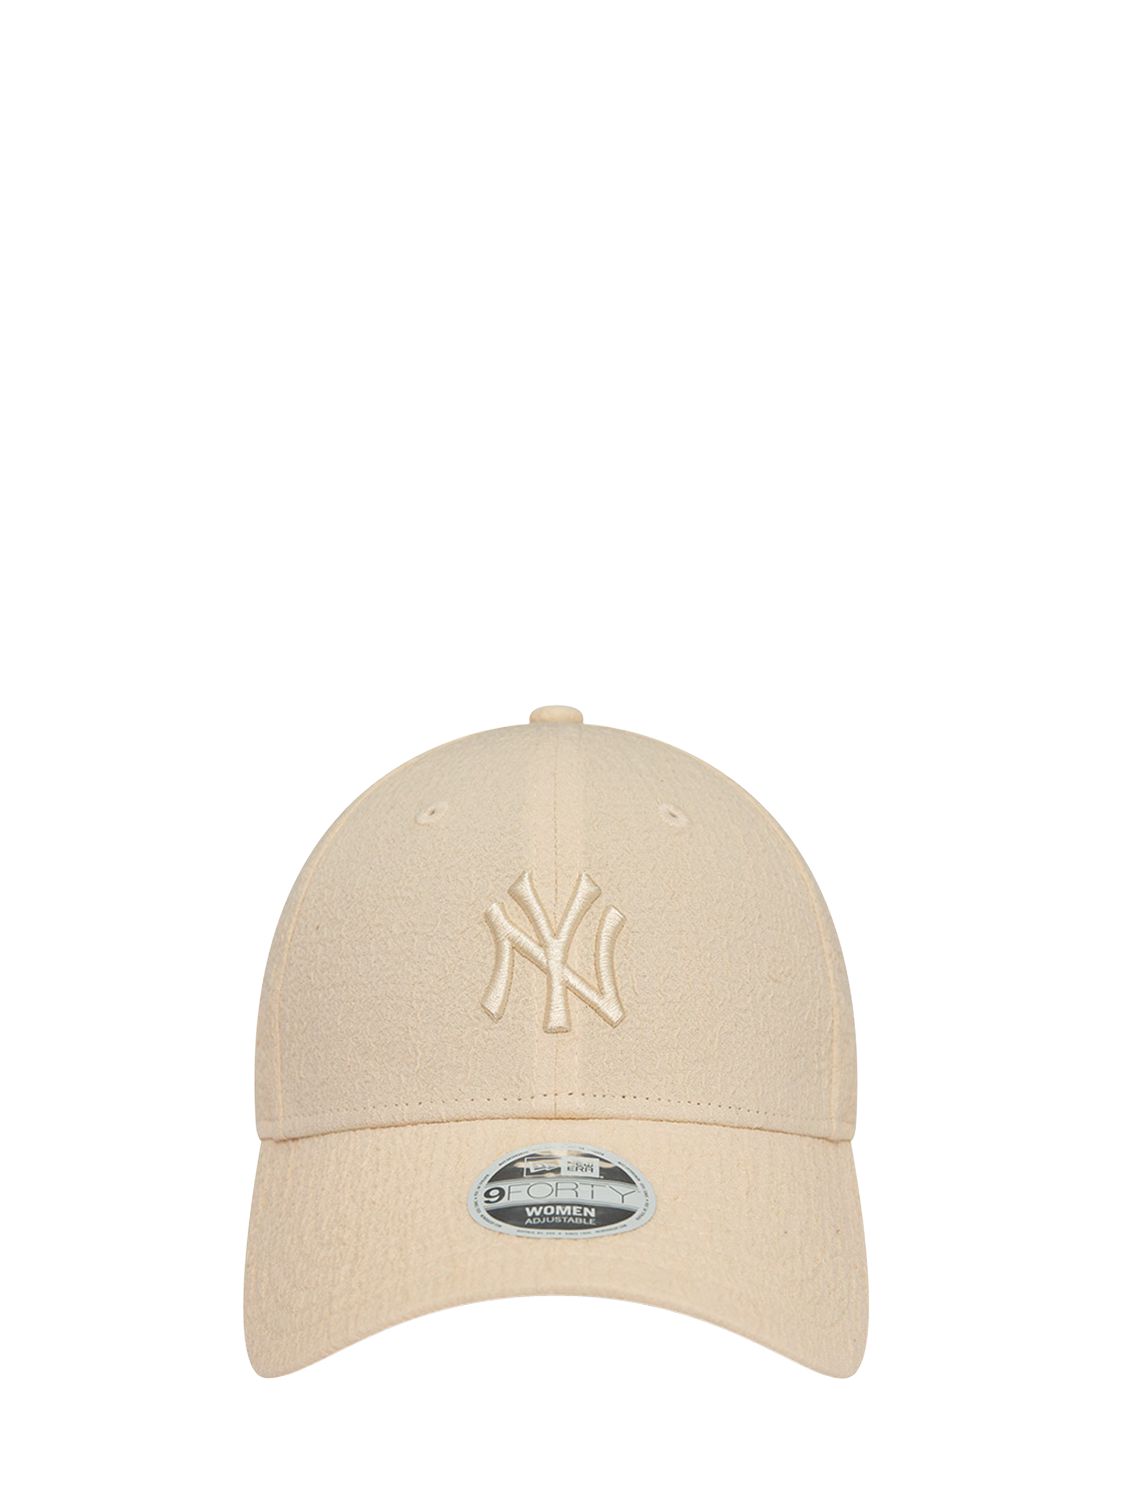 New Era Ny Yankees Bubble Stitch 9forty Hat In Brown